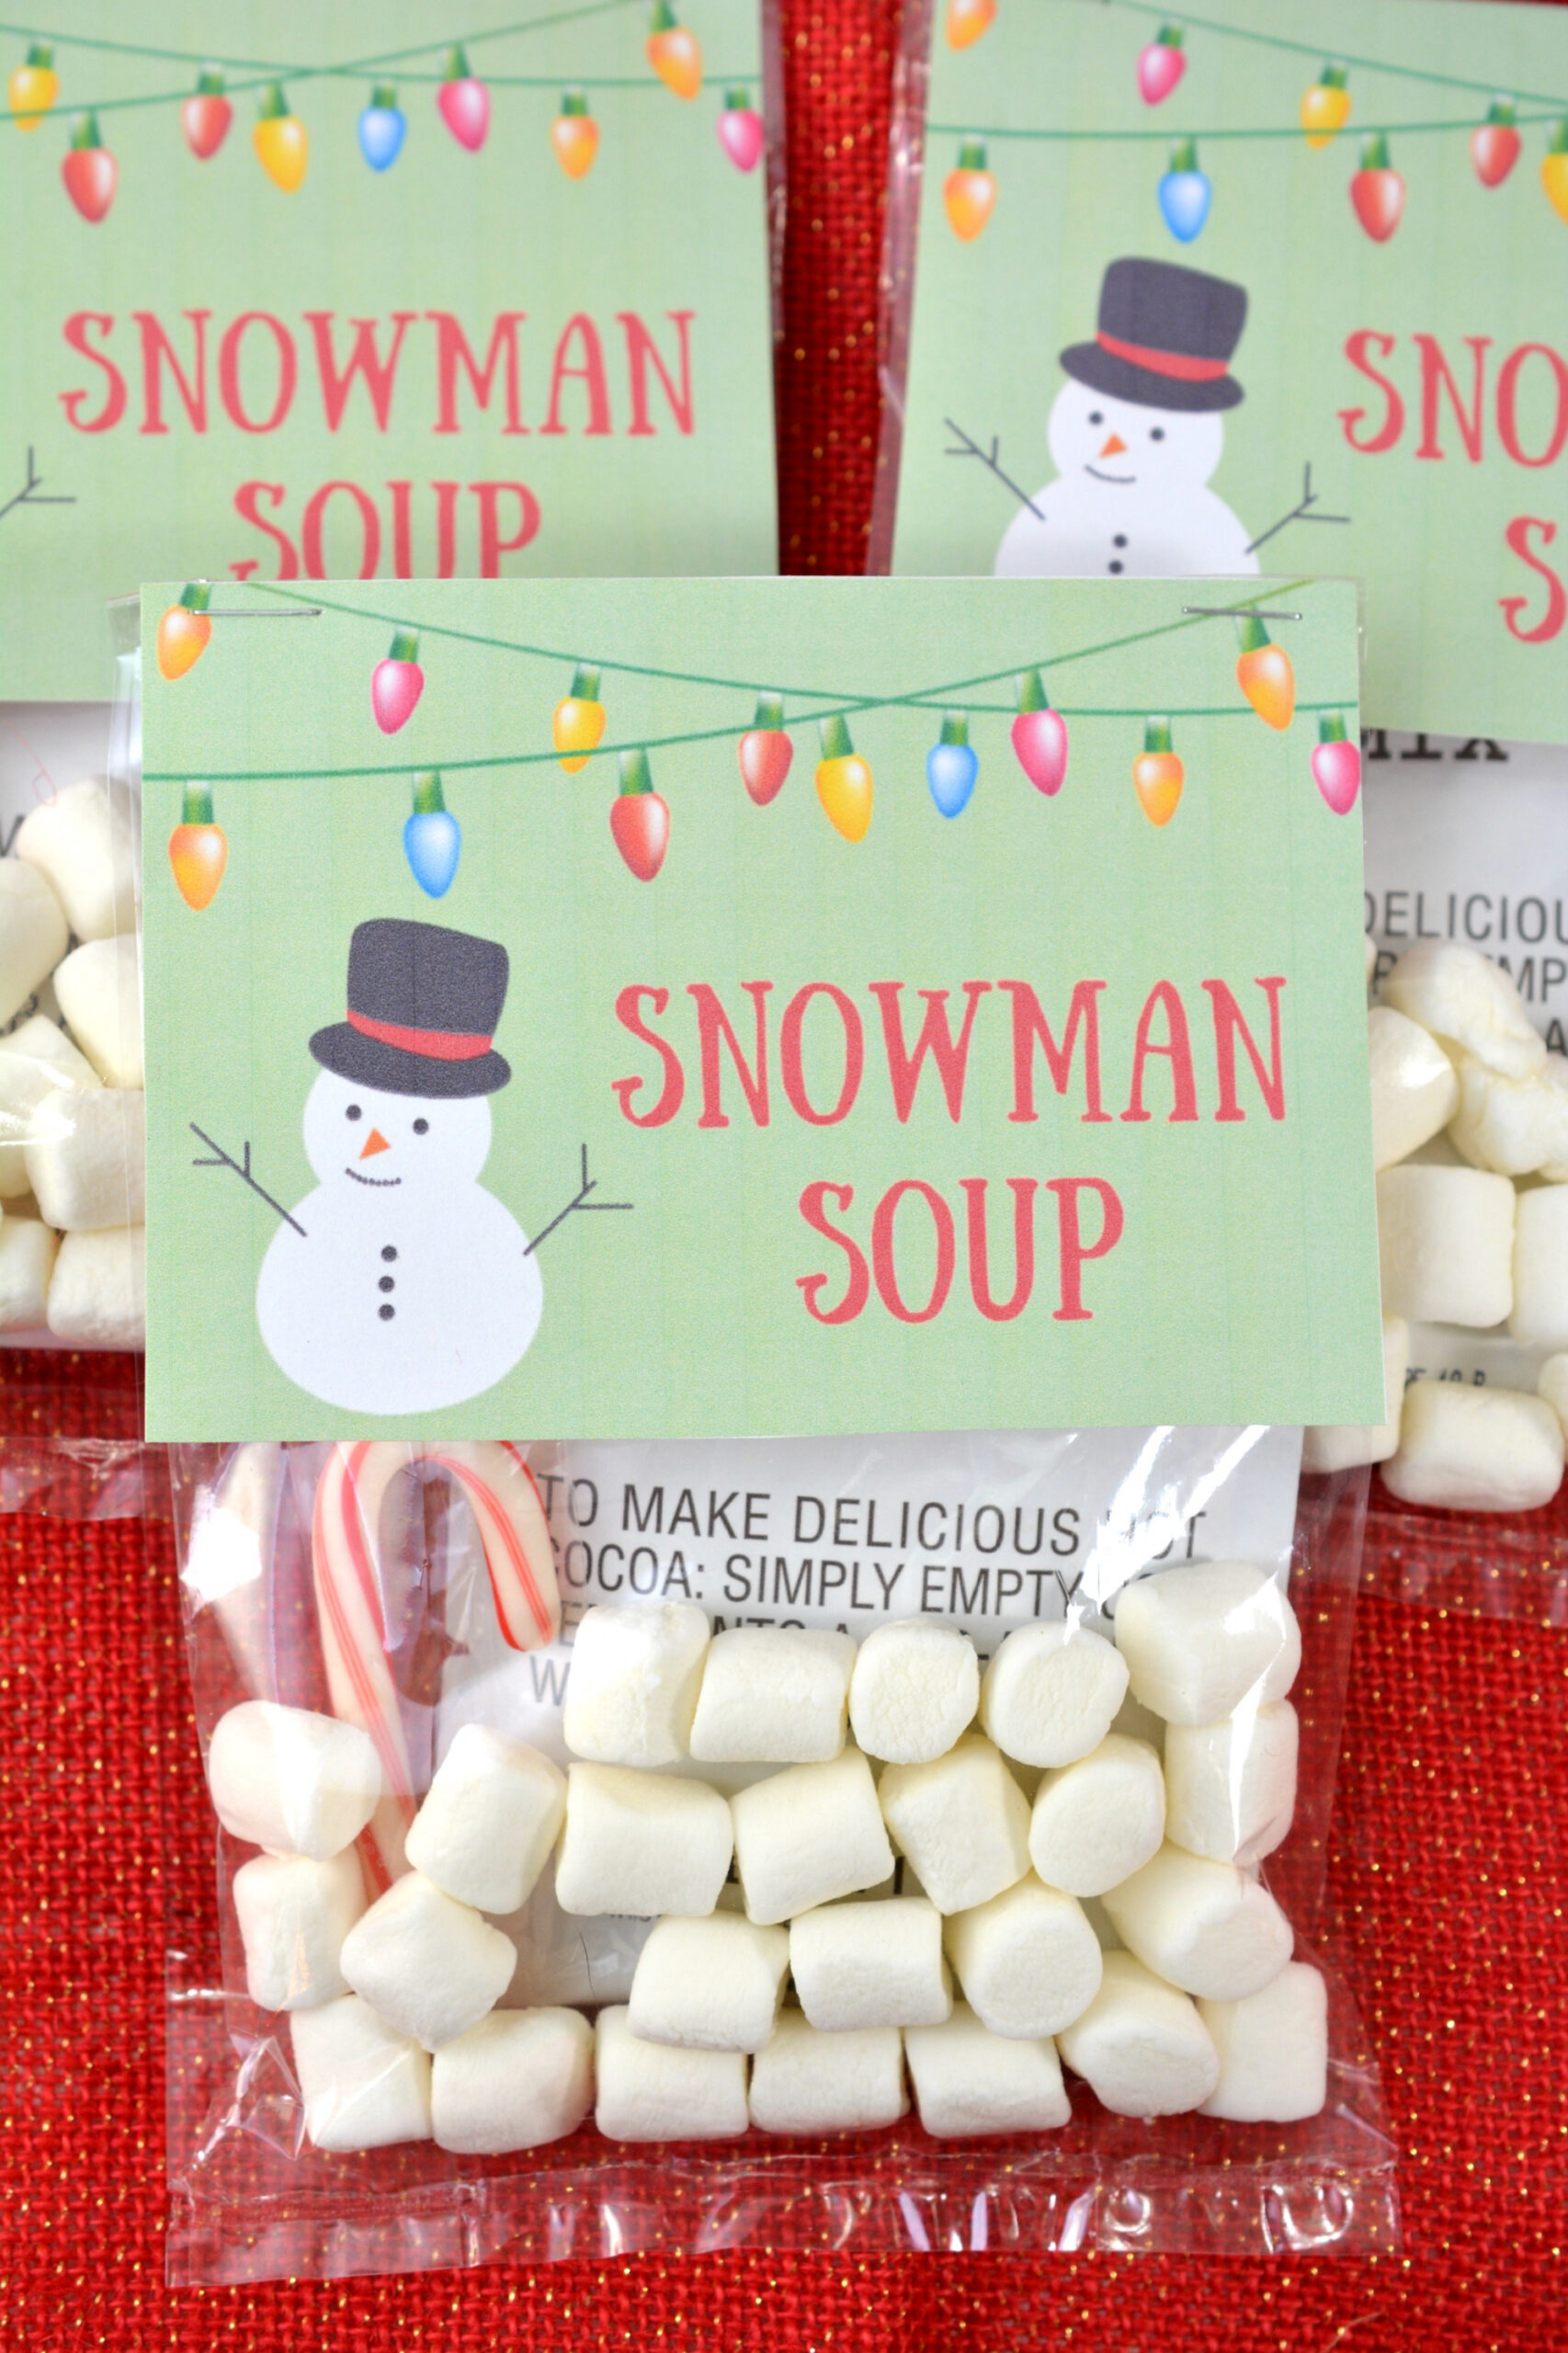 Homemade Holiday Gift Idea: Snowman Soup with Free Printable  - FREE Printables - Snowman Soup Printable Free